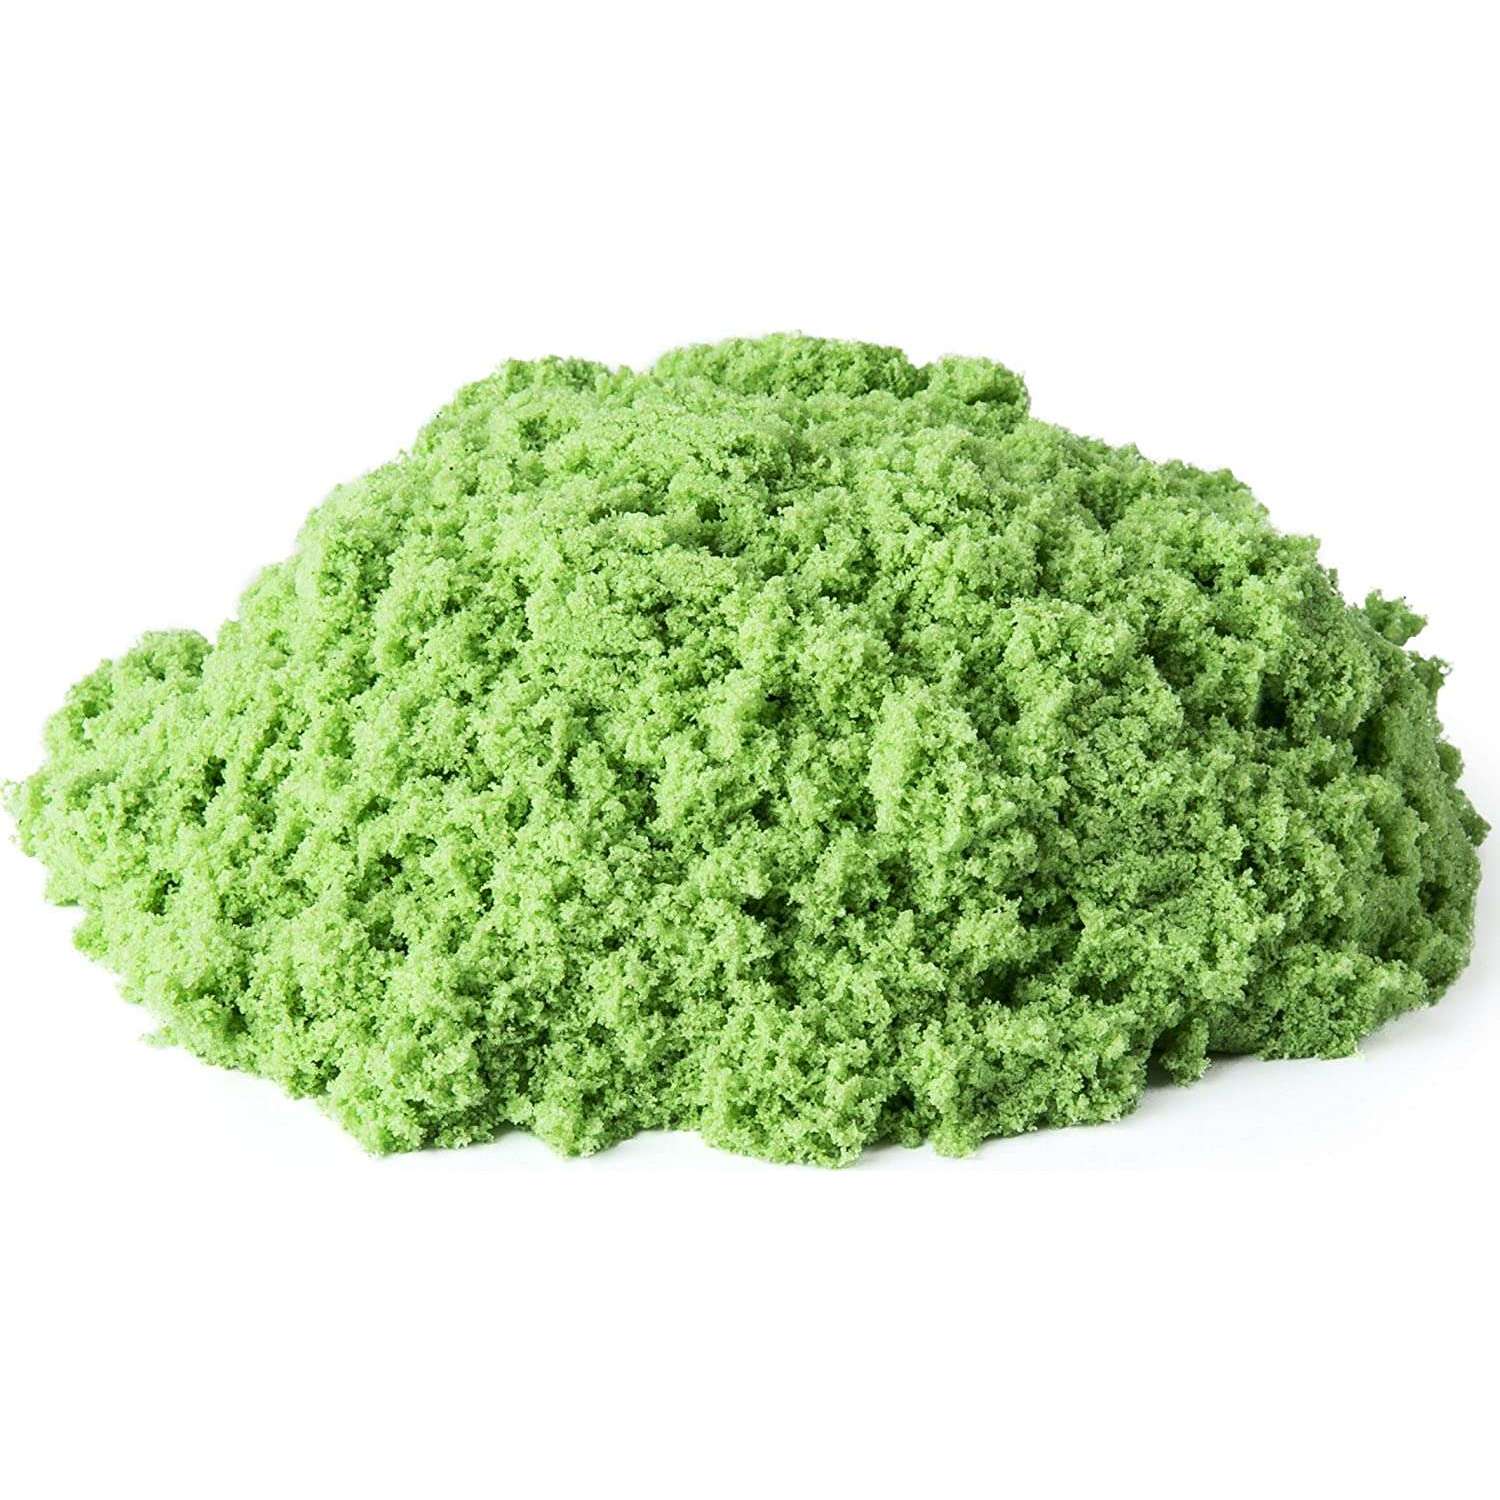 Toys N Tuck:Kinetic Sand 4.5oz Single Container - Green,Kinetic Sand